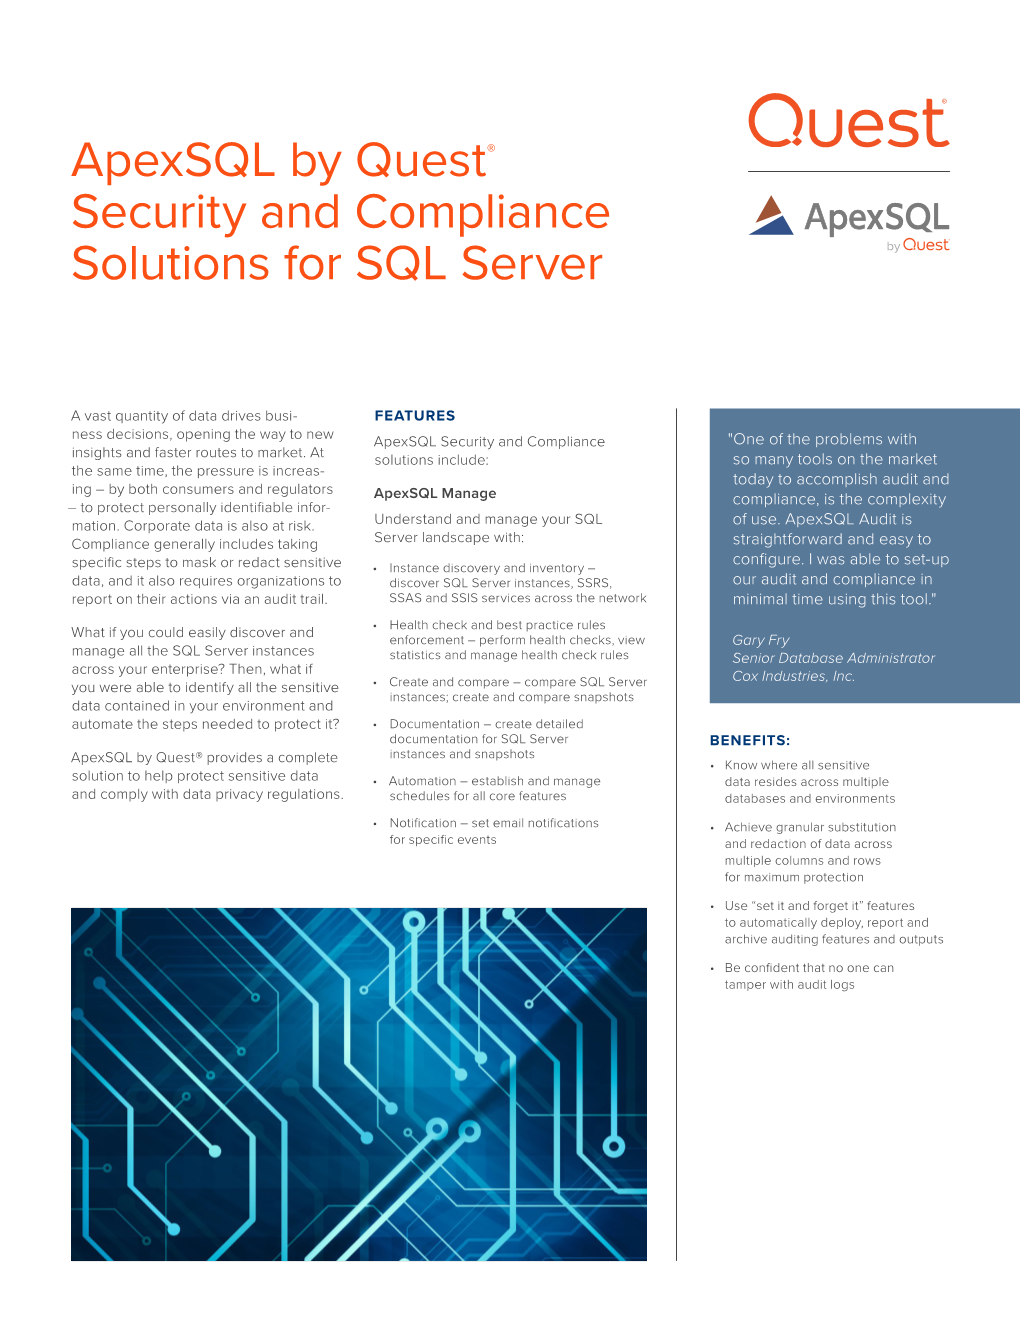 Apexsql Security and Compliance Solutions for SQL